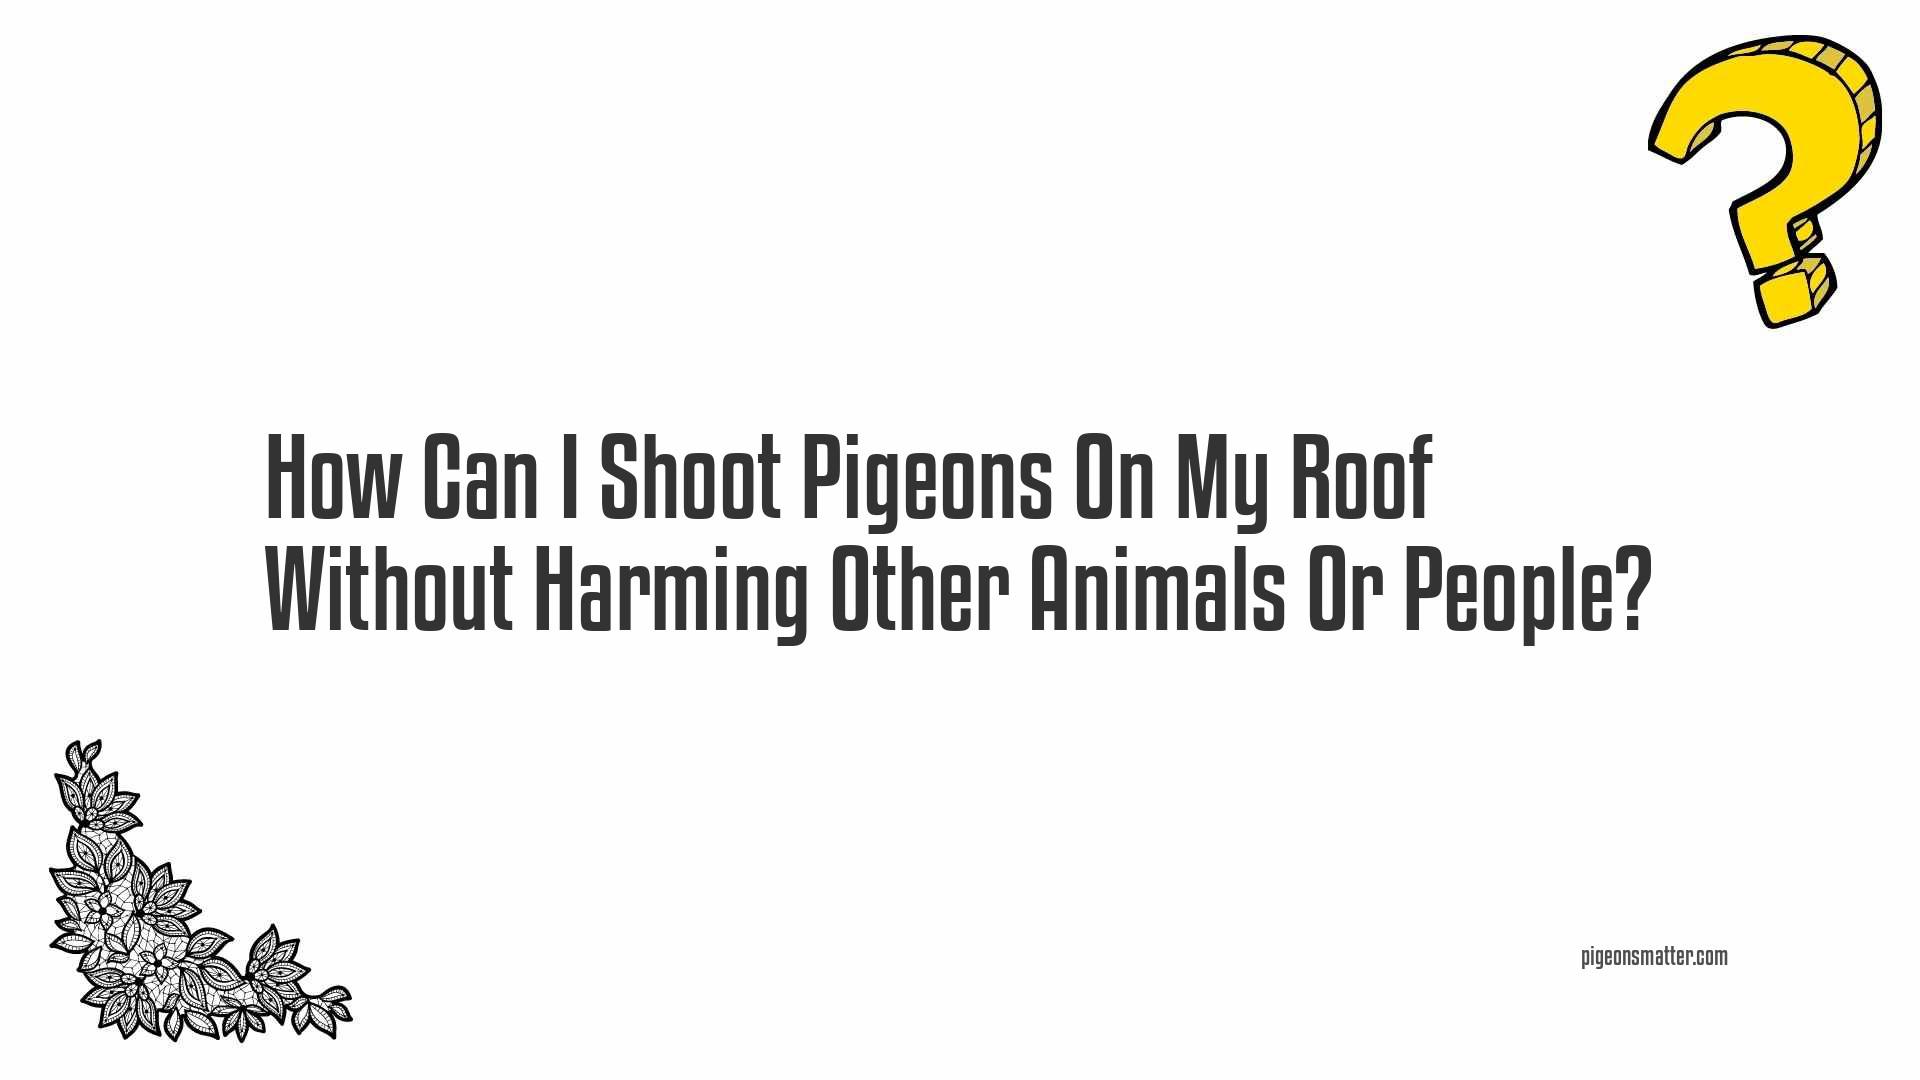 How Can I Shoot Pigeons On My Roof Without Harming Other Animals Or People?